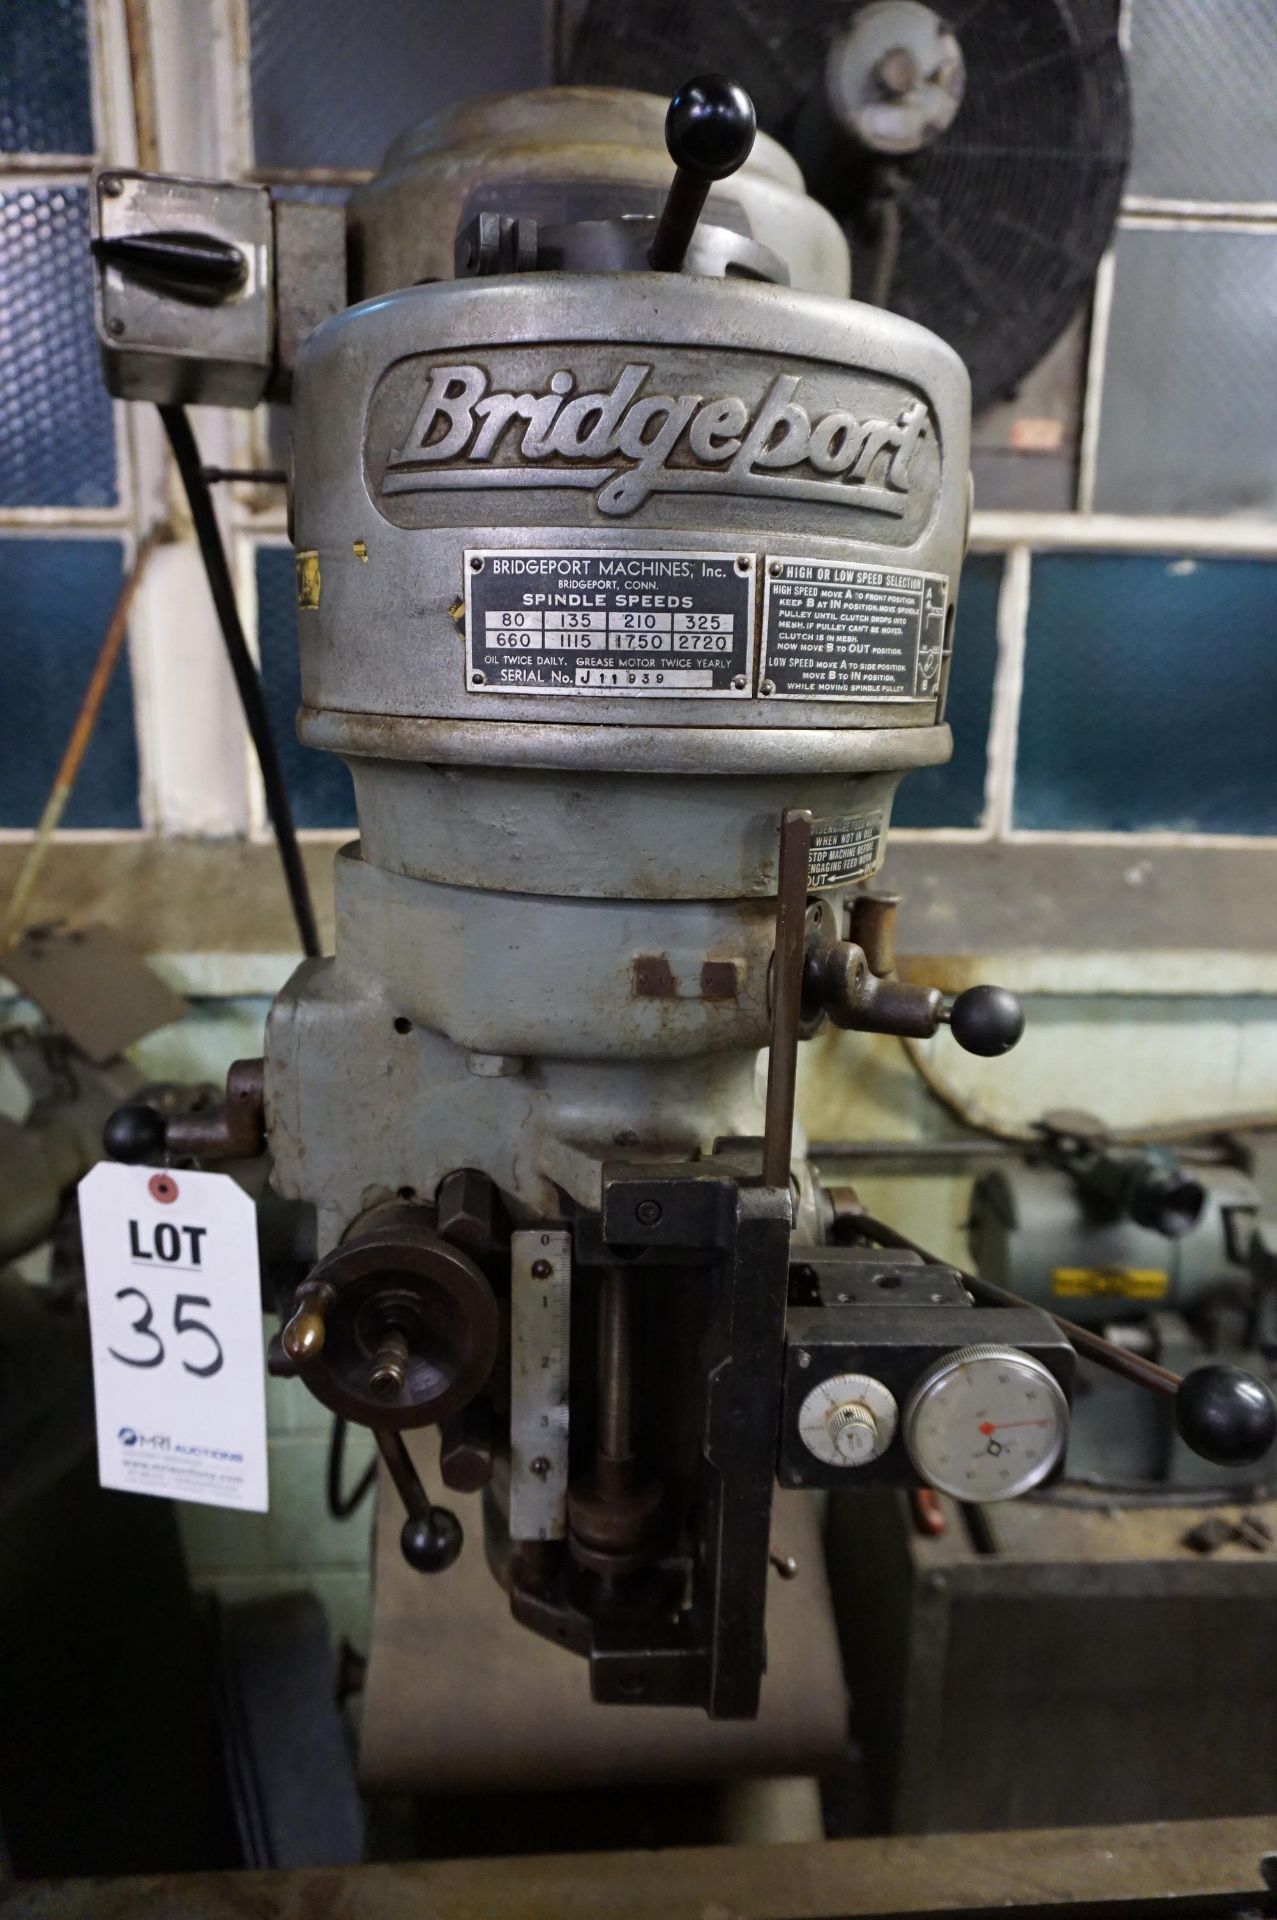 BRIDGEPORT 8-SPEED VERTICAL MILLING MACHINE, 1 HP, 9” X 42” TABLE SIZE, (3) TRAV-A-DIAL GAUGES - Image 2 of 5